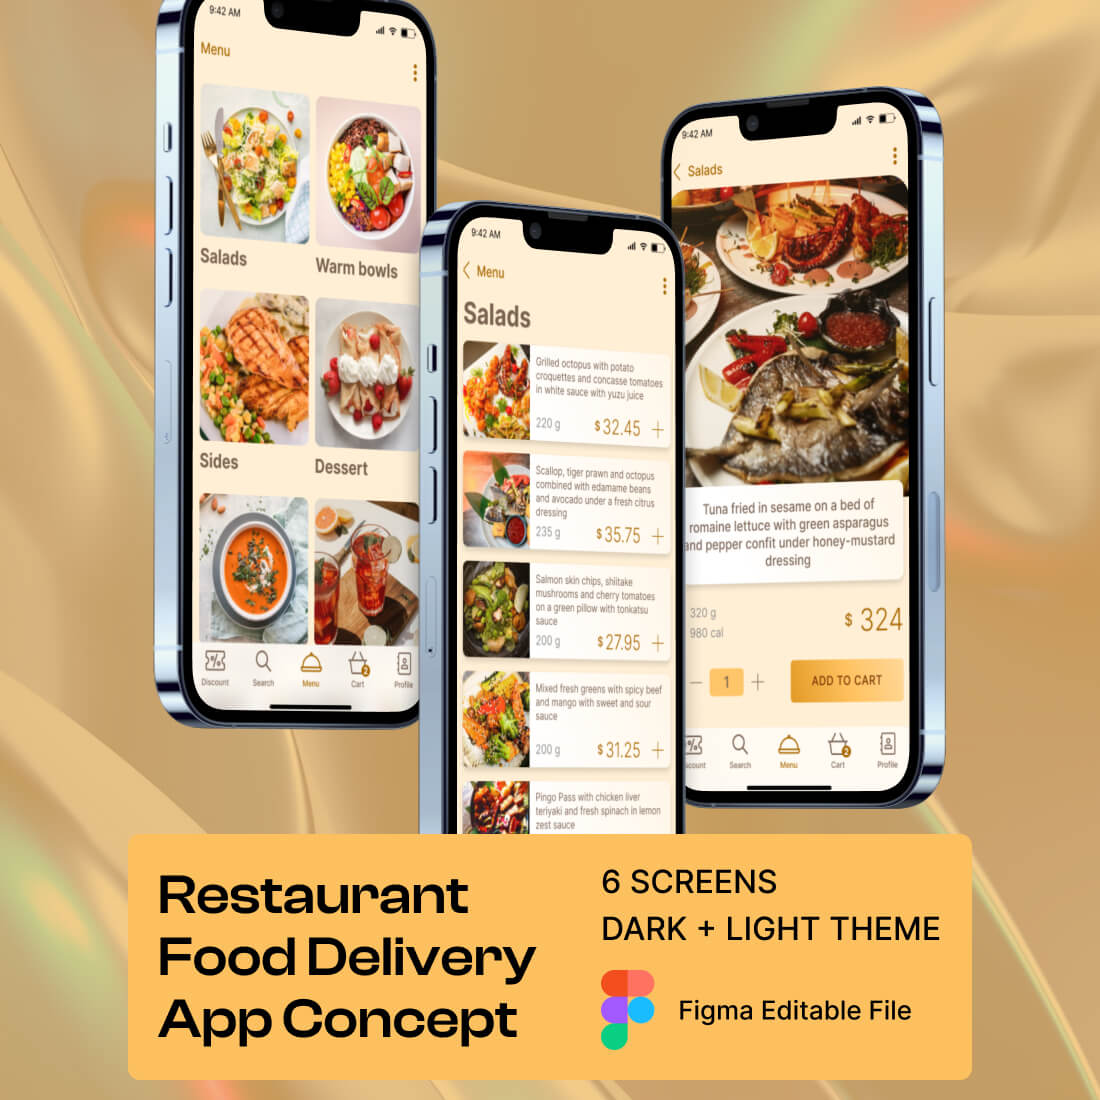 Food Delivery App Concept White Theme cover image.